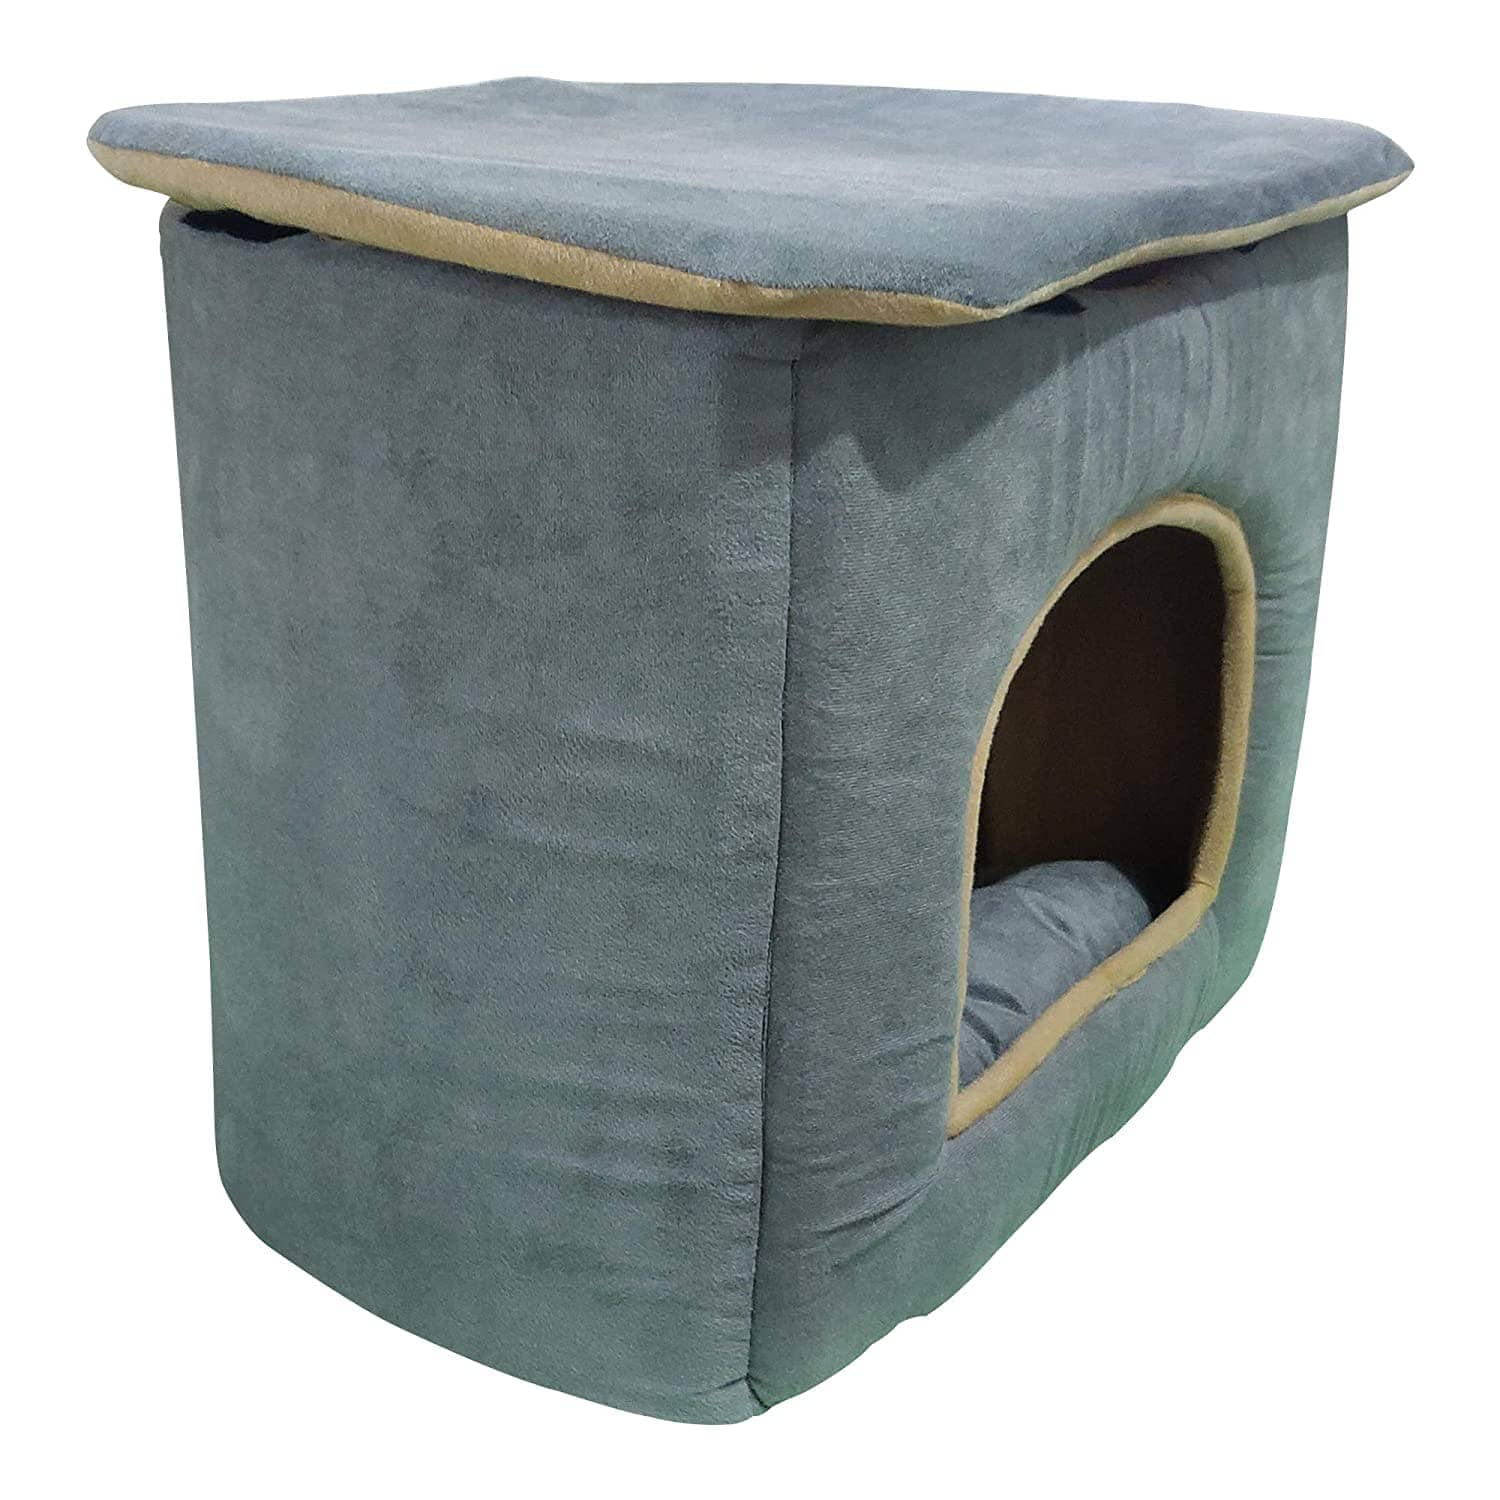 Hiputee Foldable D Shape Velvet House/Hut for Dogs and Cats (Grey & Cream)